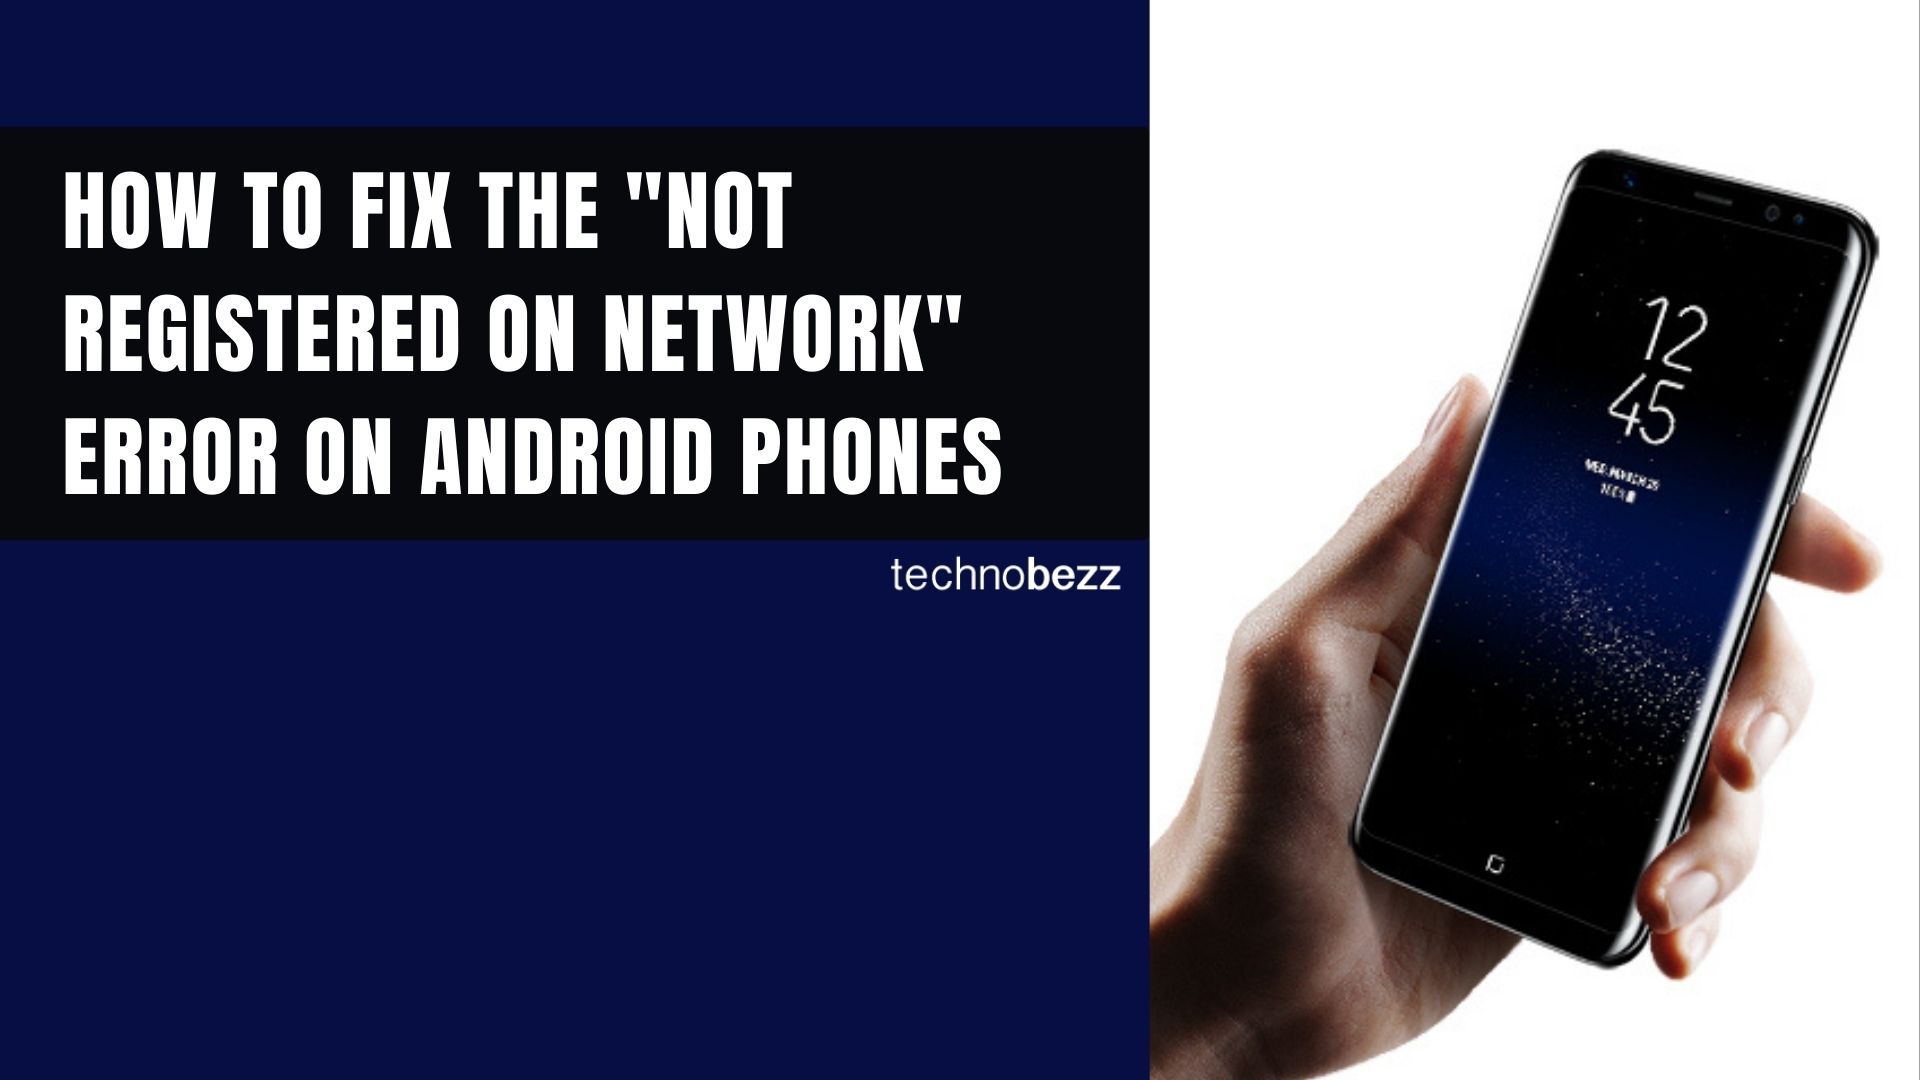 How To Fix The Not Registered On Network Error On Android Phones - Technobezz